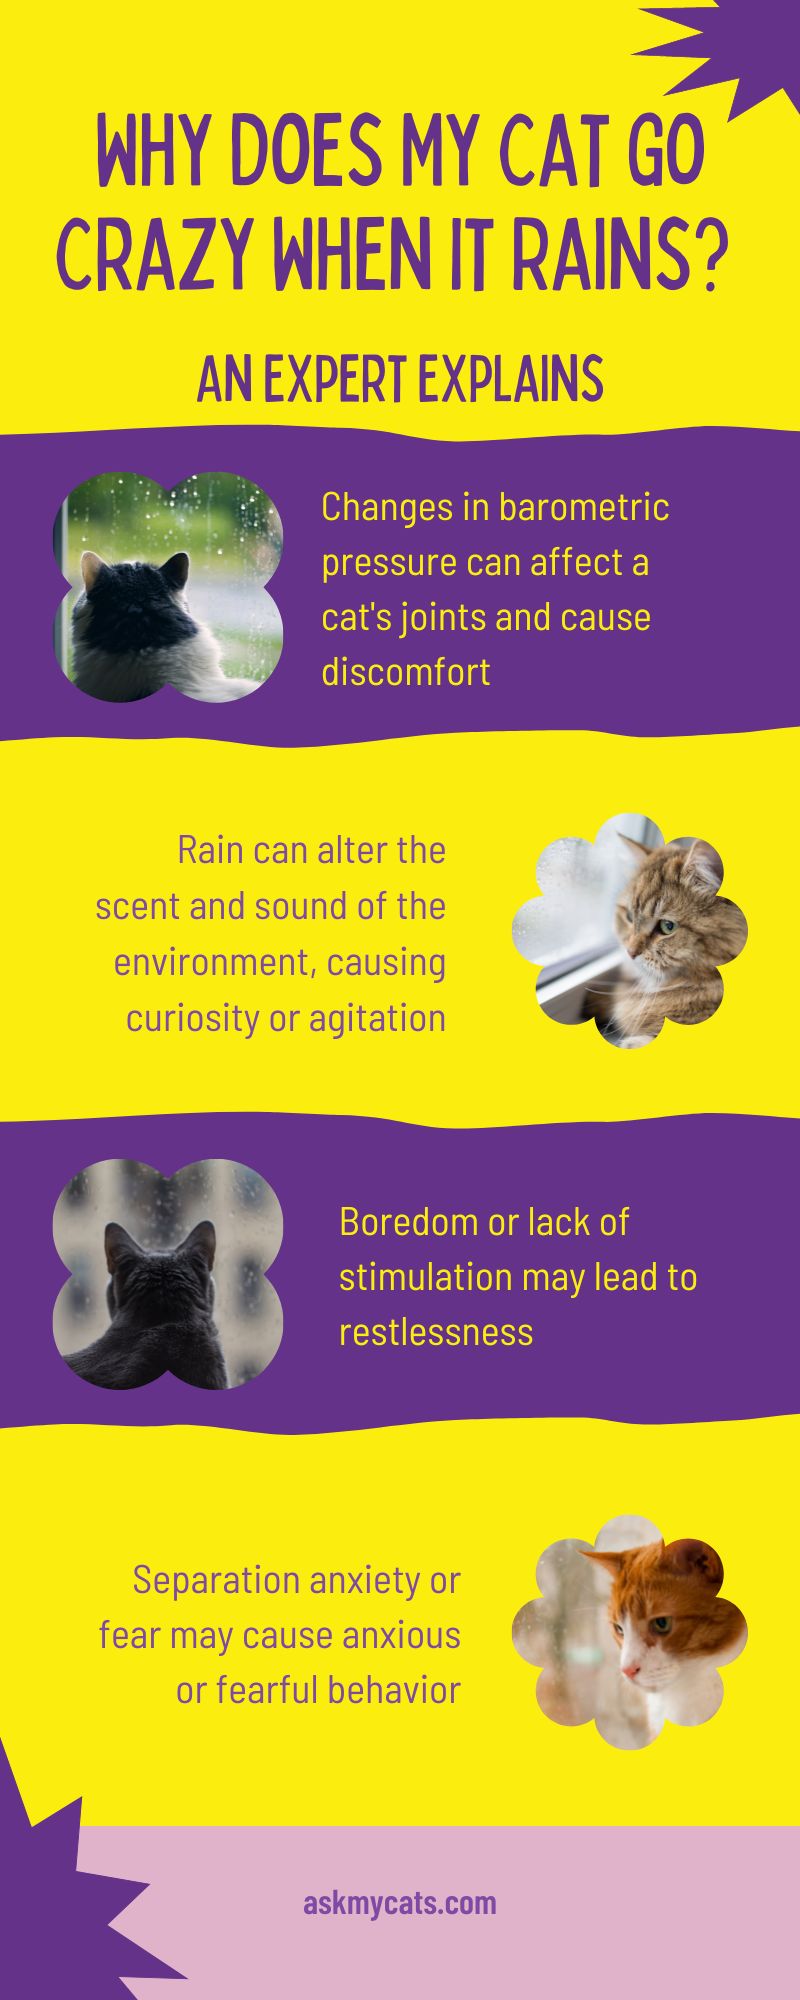 Why Does My Cat Go Crazy When It Rains? (Infographic)